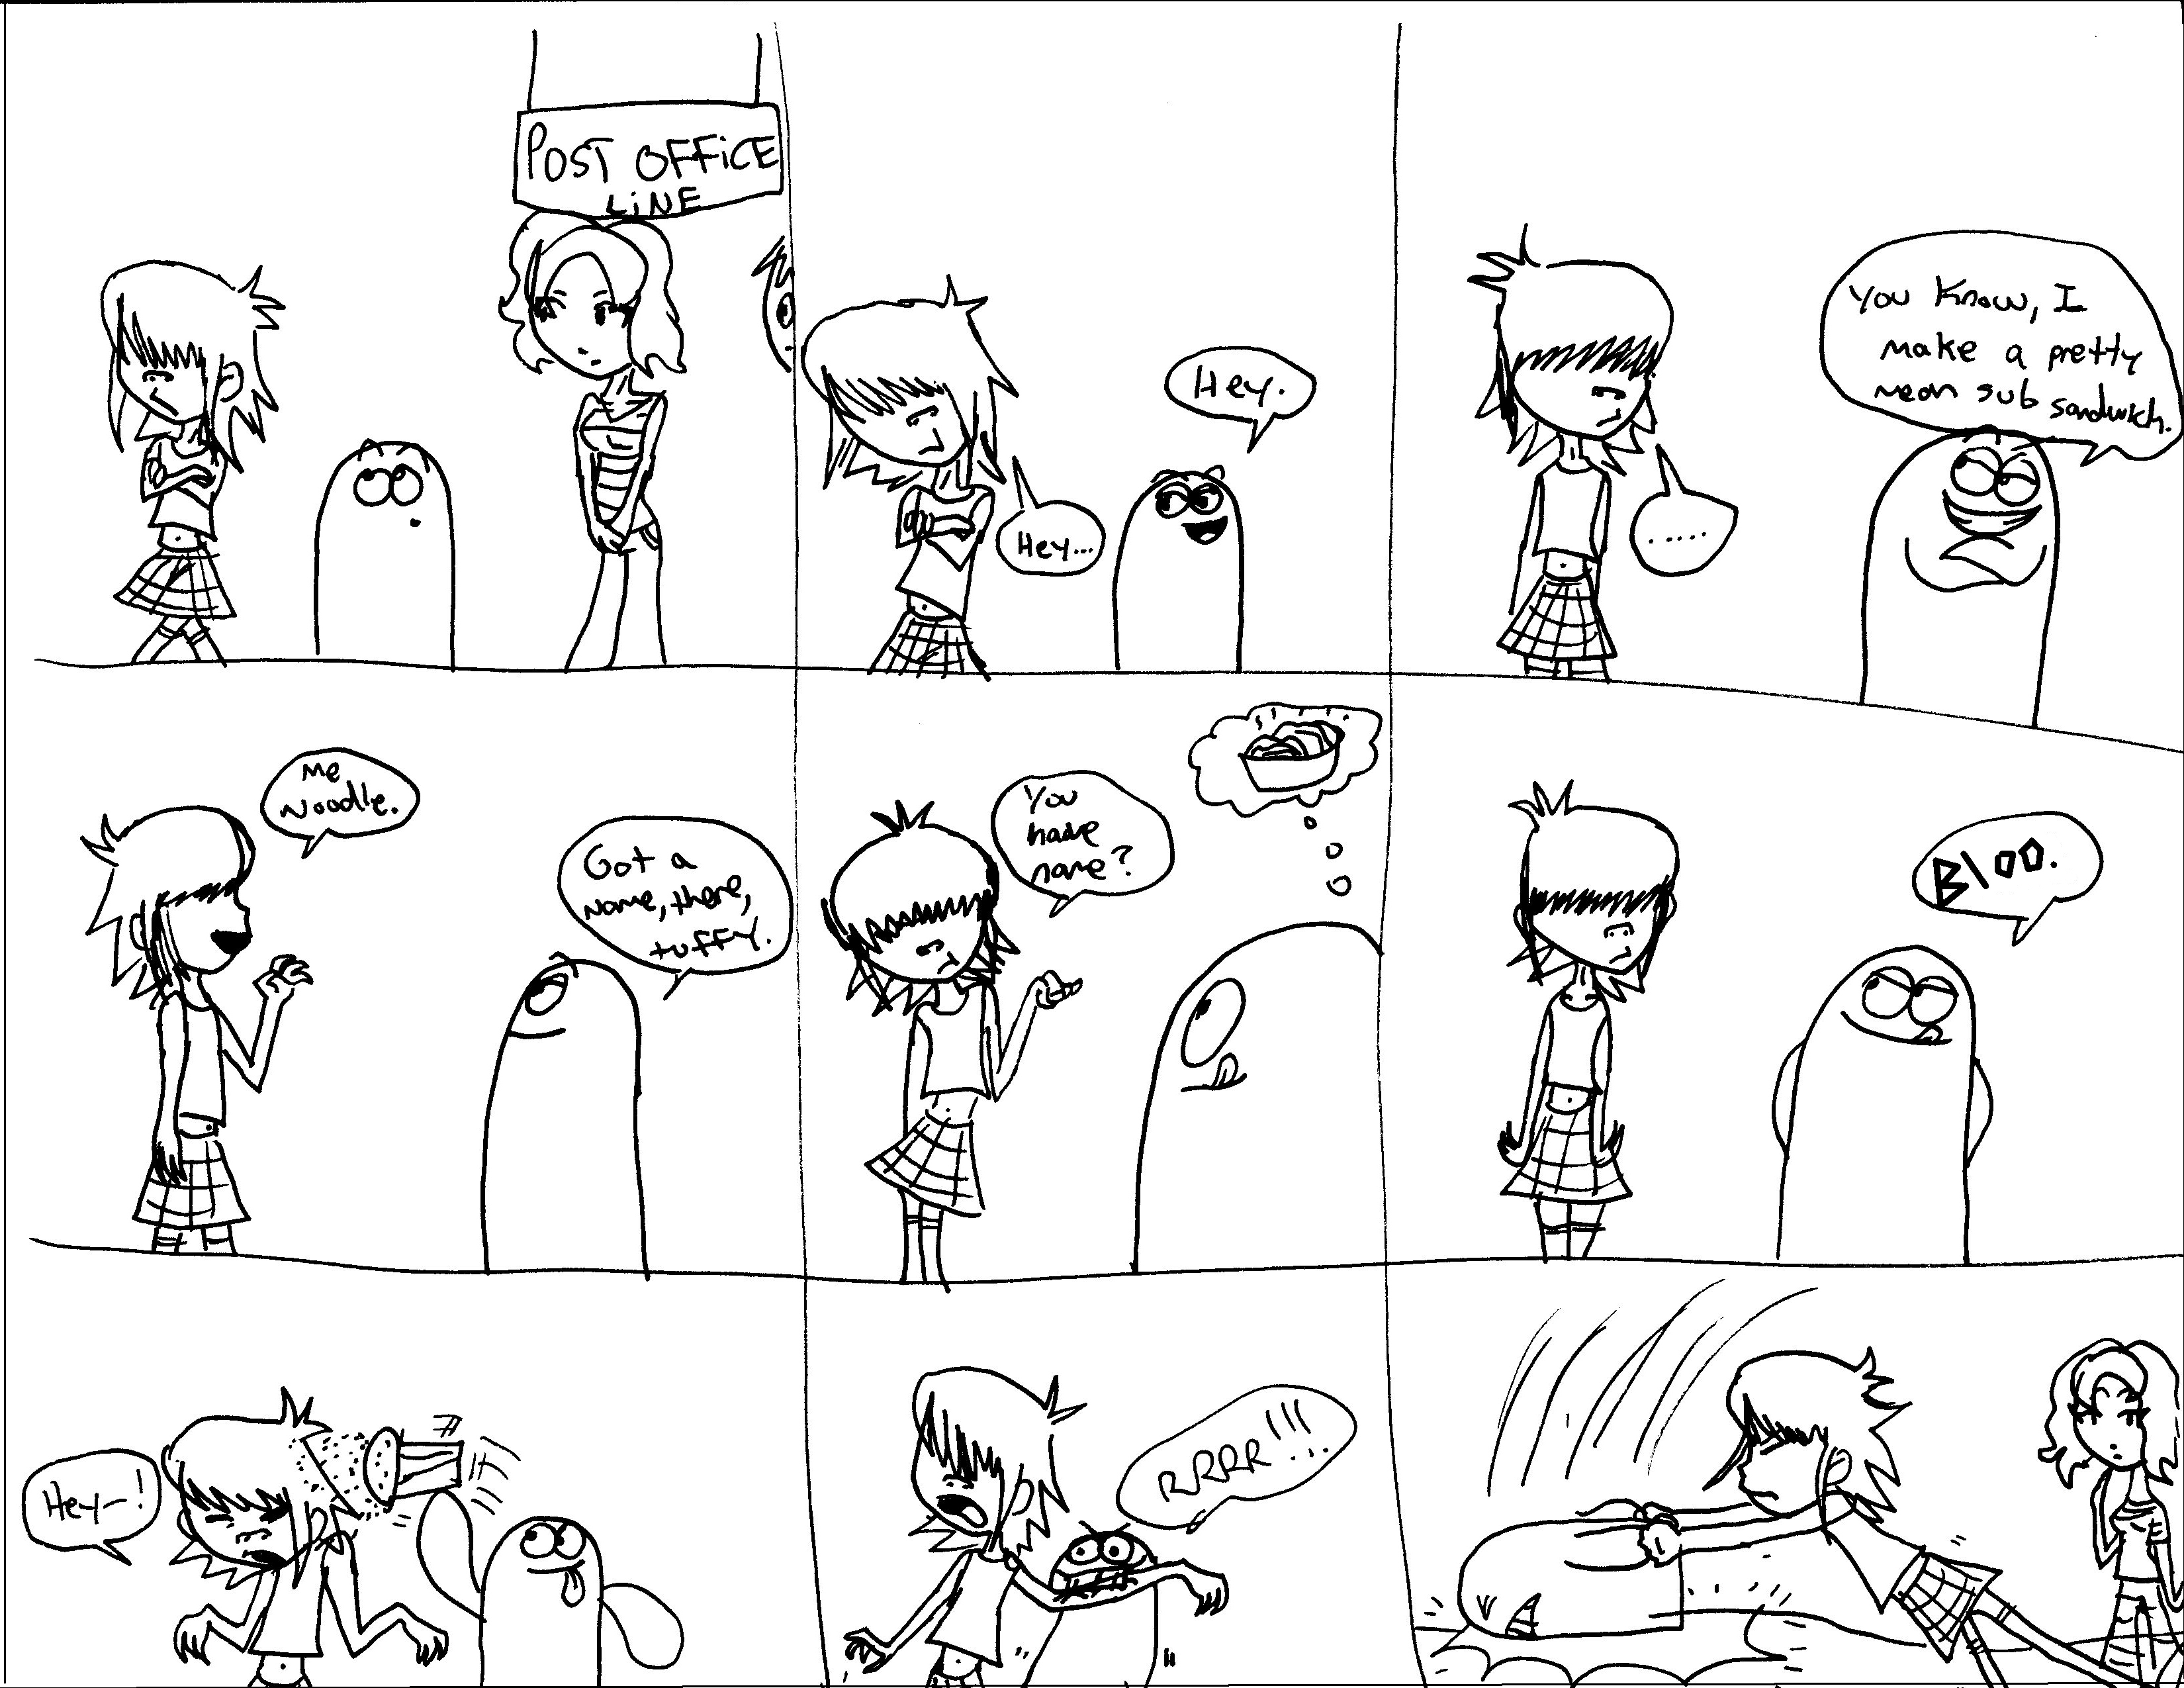 Noodle meets Bloo comic by bloo180